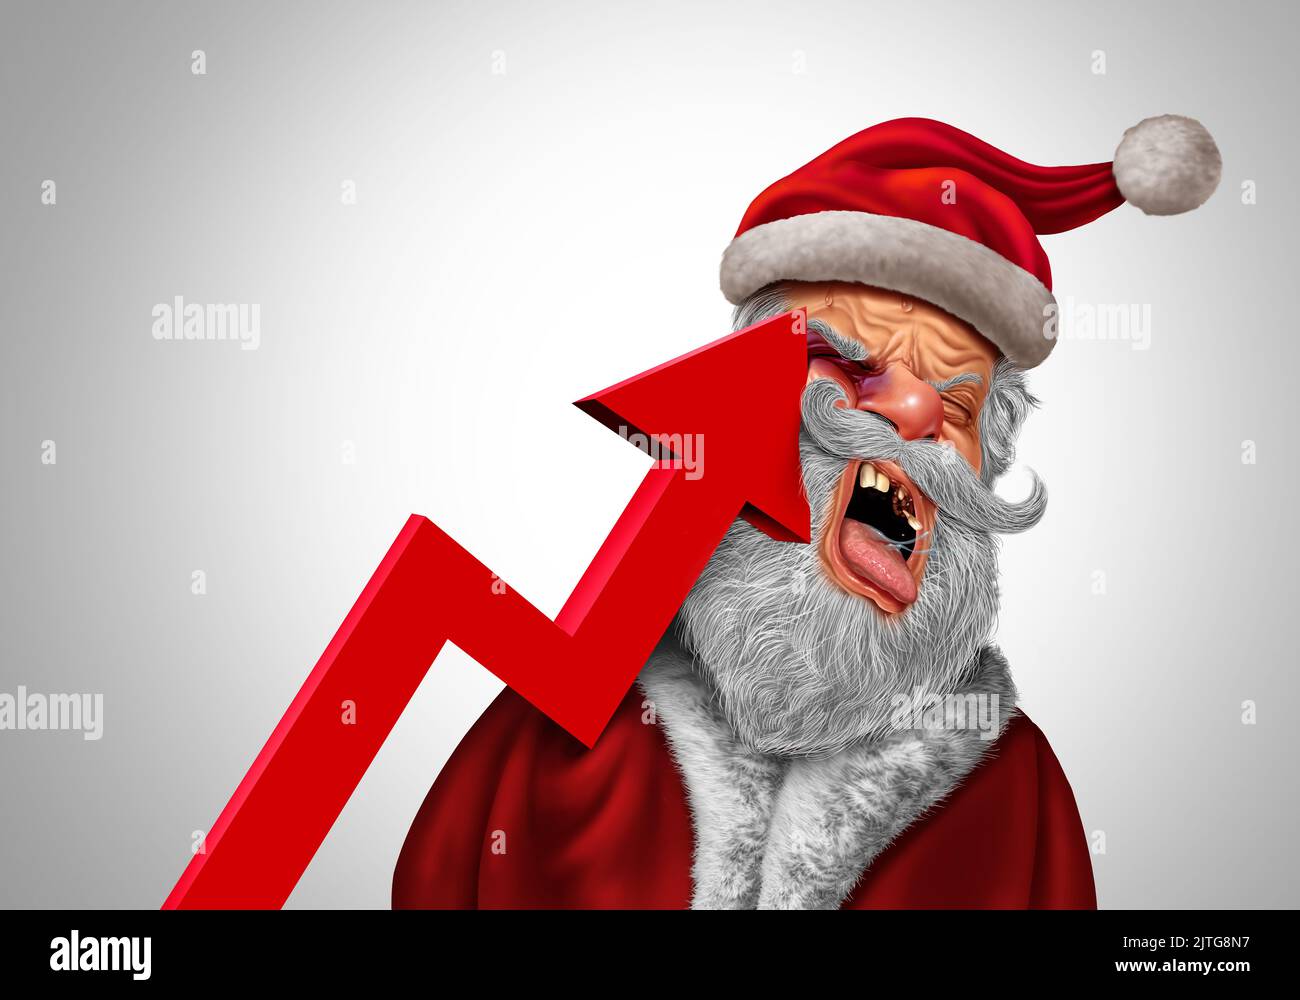 Christmas Inflation pain concept as Santa Claus being hit hard by an upward leaning financial chart arrow representing rising consumer prices Stock Photo